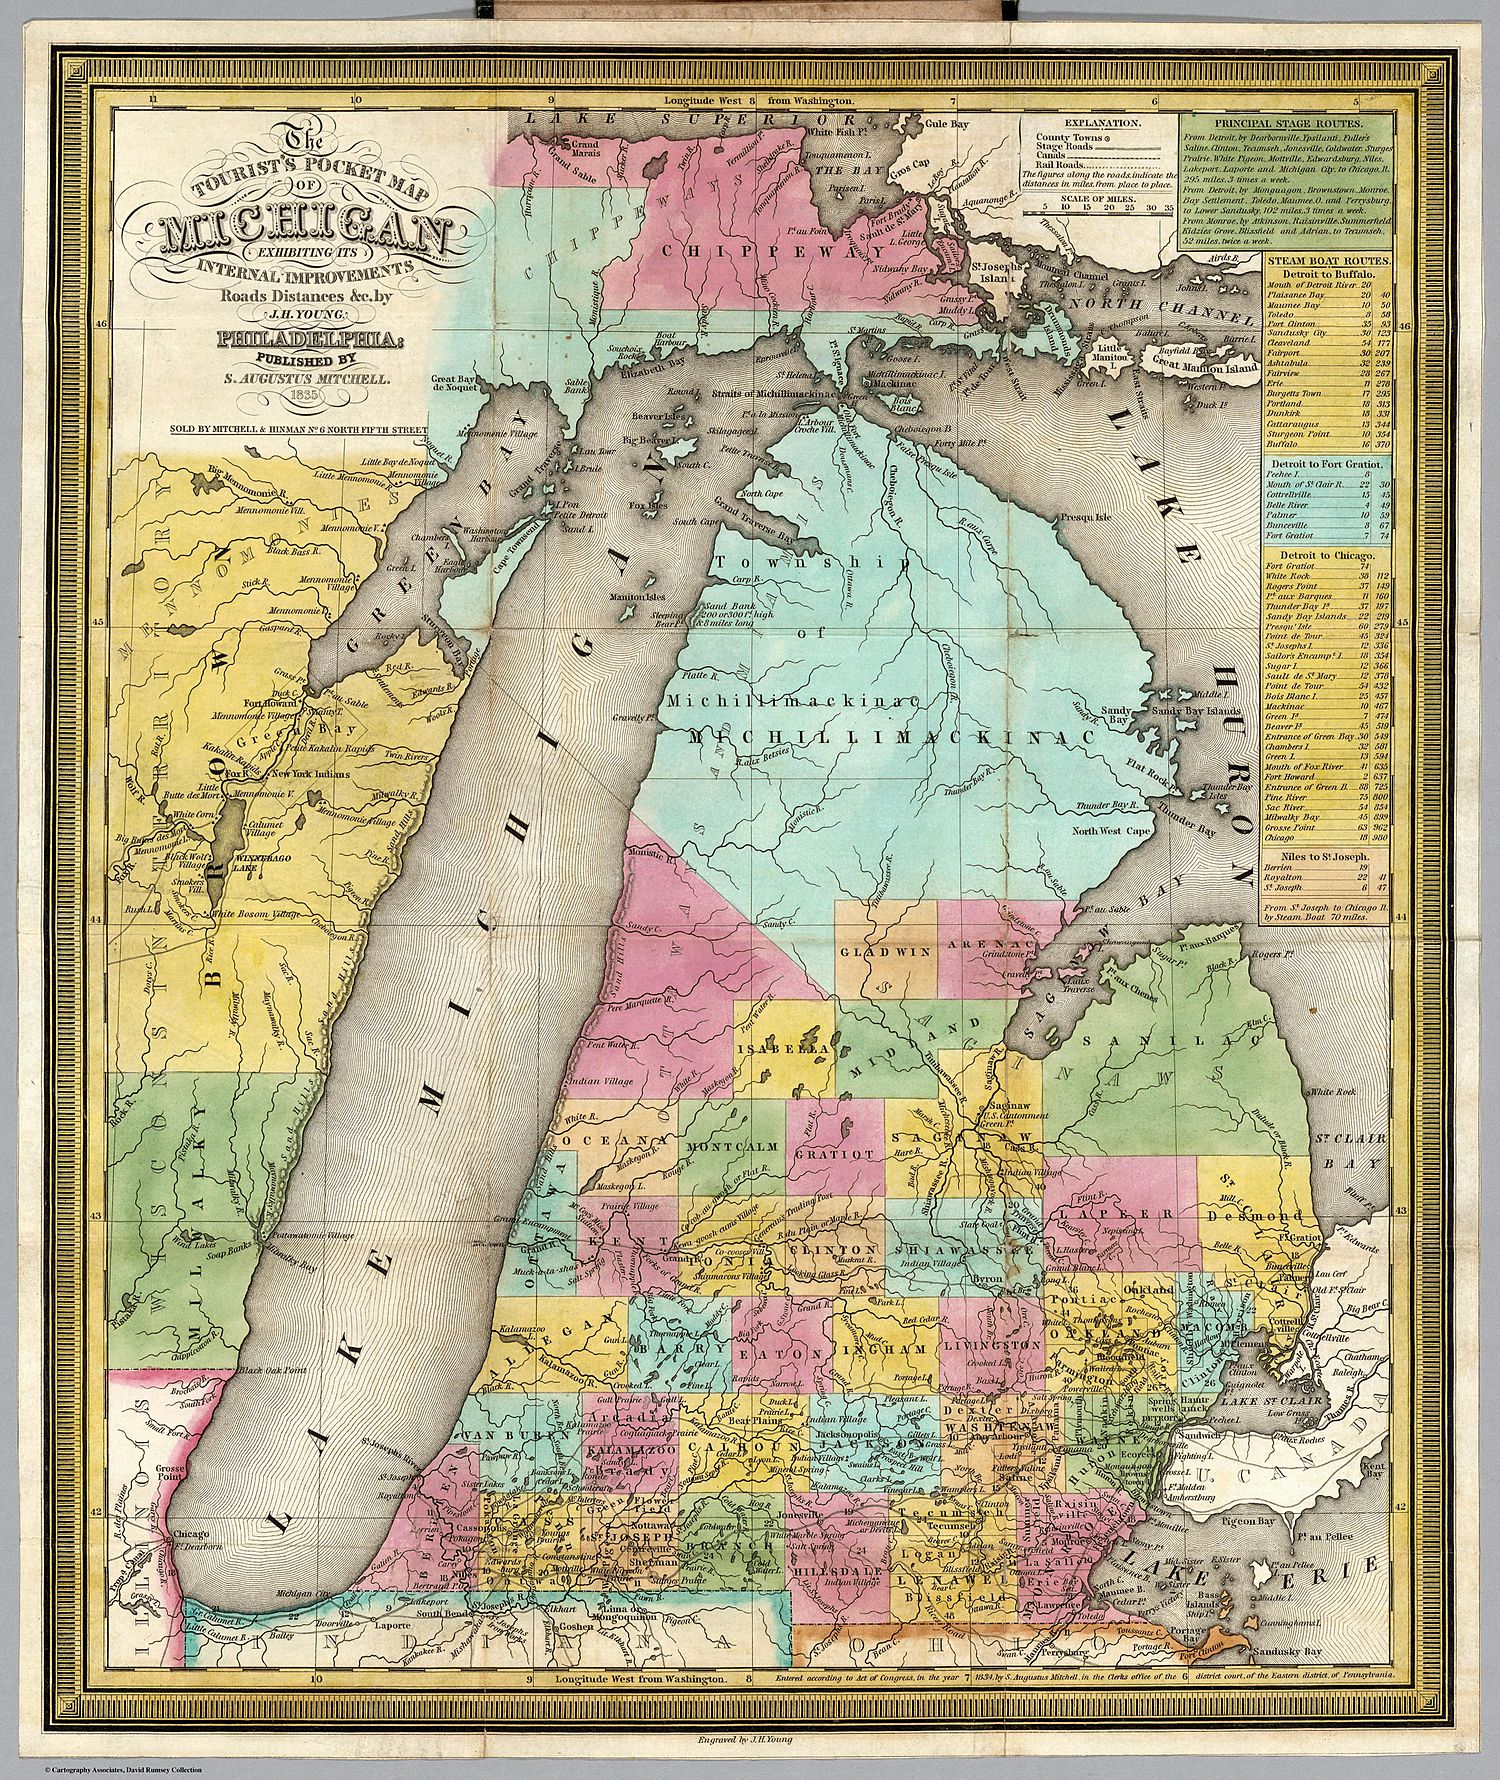 Wisconsin Territory depicted on this 1835 Tourist's Pocket Map Of Michigan, showing a Menominee-filled Brown County, Wisconsin that spans the northern half of the territory.